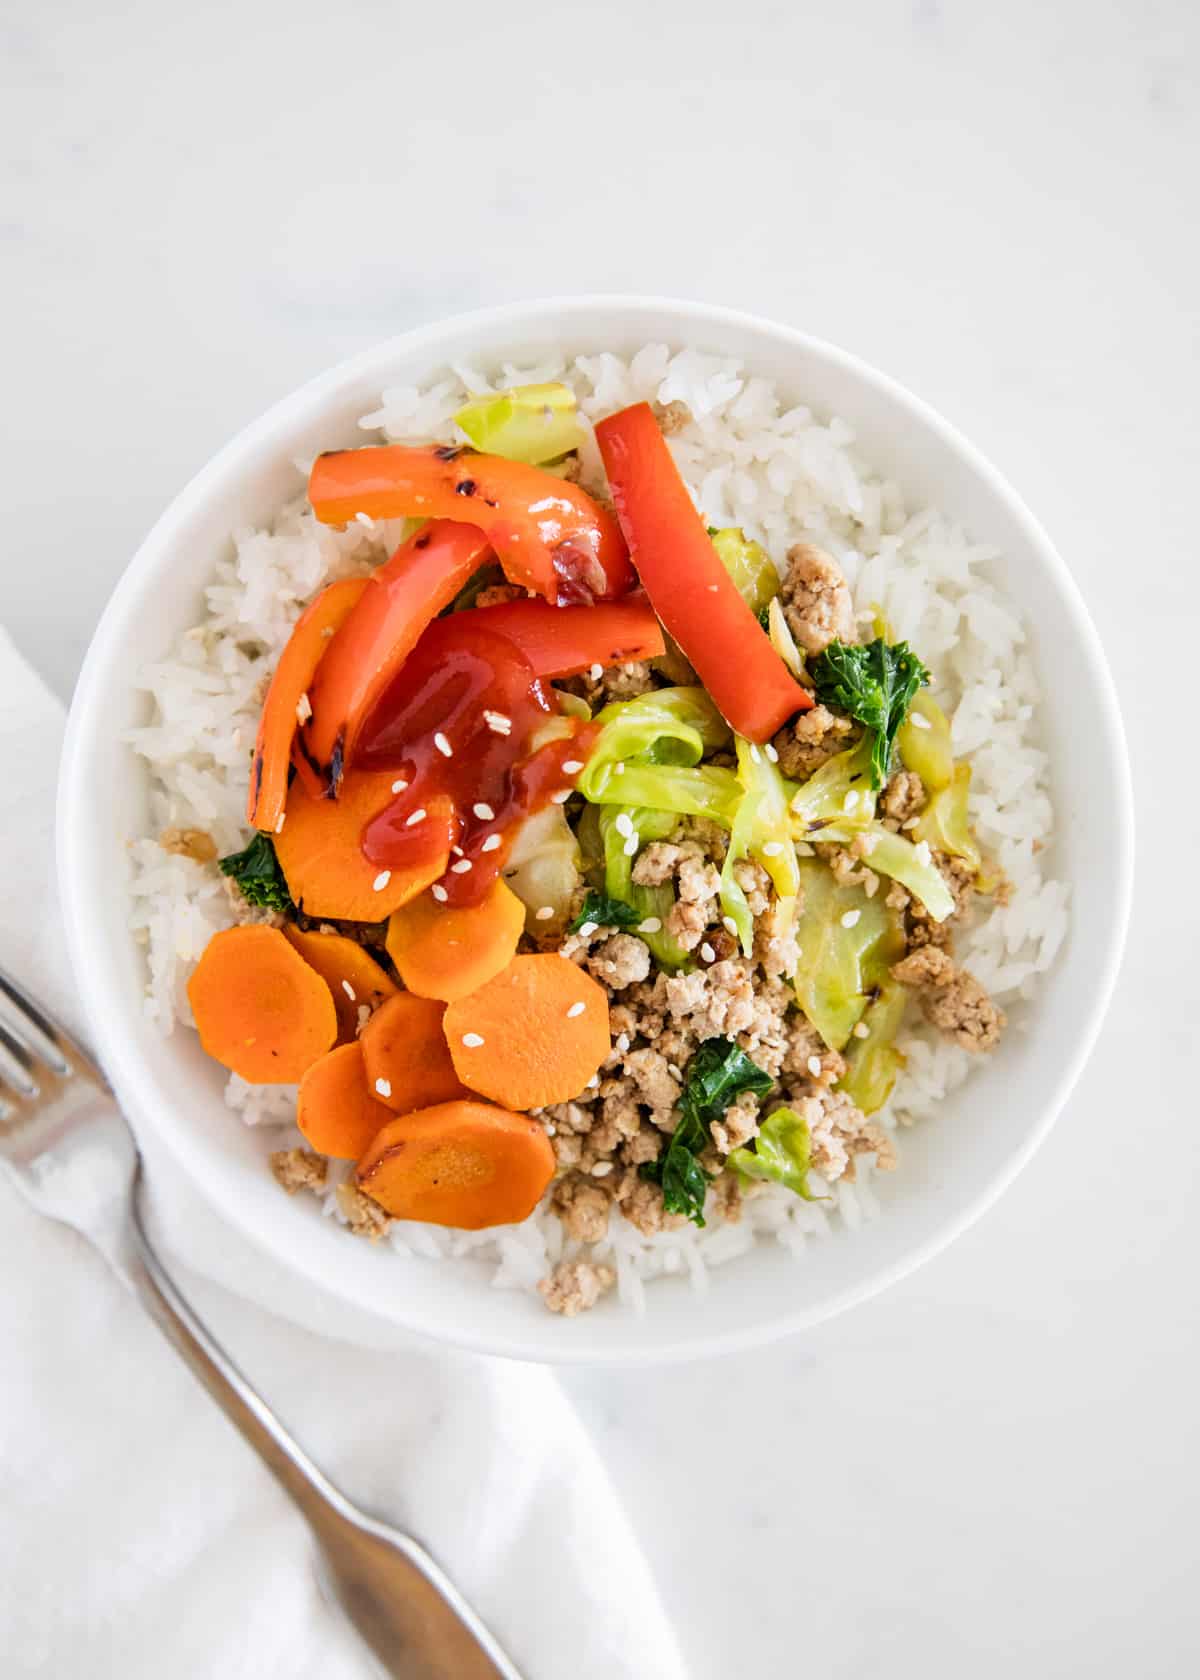 Ground turkey with vegetables and rice in bowl.